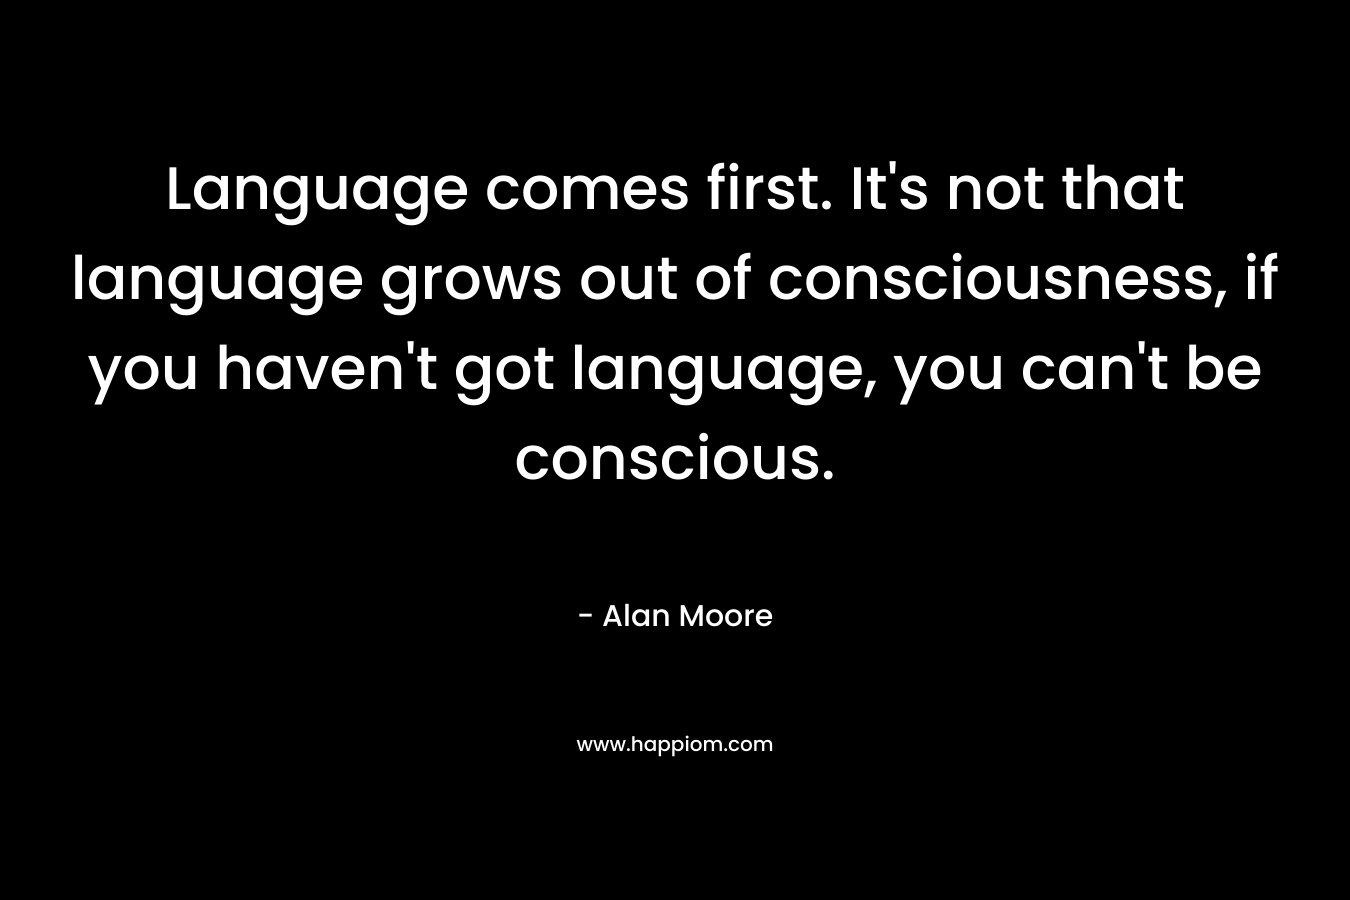 Language comes first. It’s not that language grows out of consciousness, if you haven’t got language, you can’t be conscious. – Alan Moore